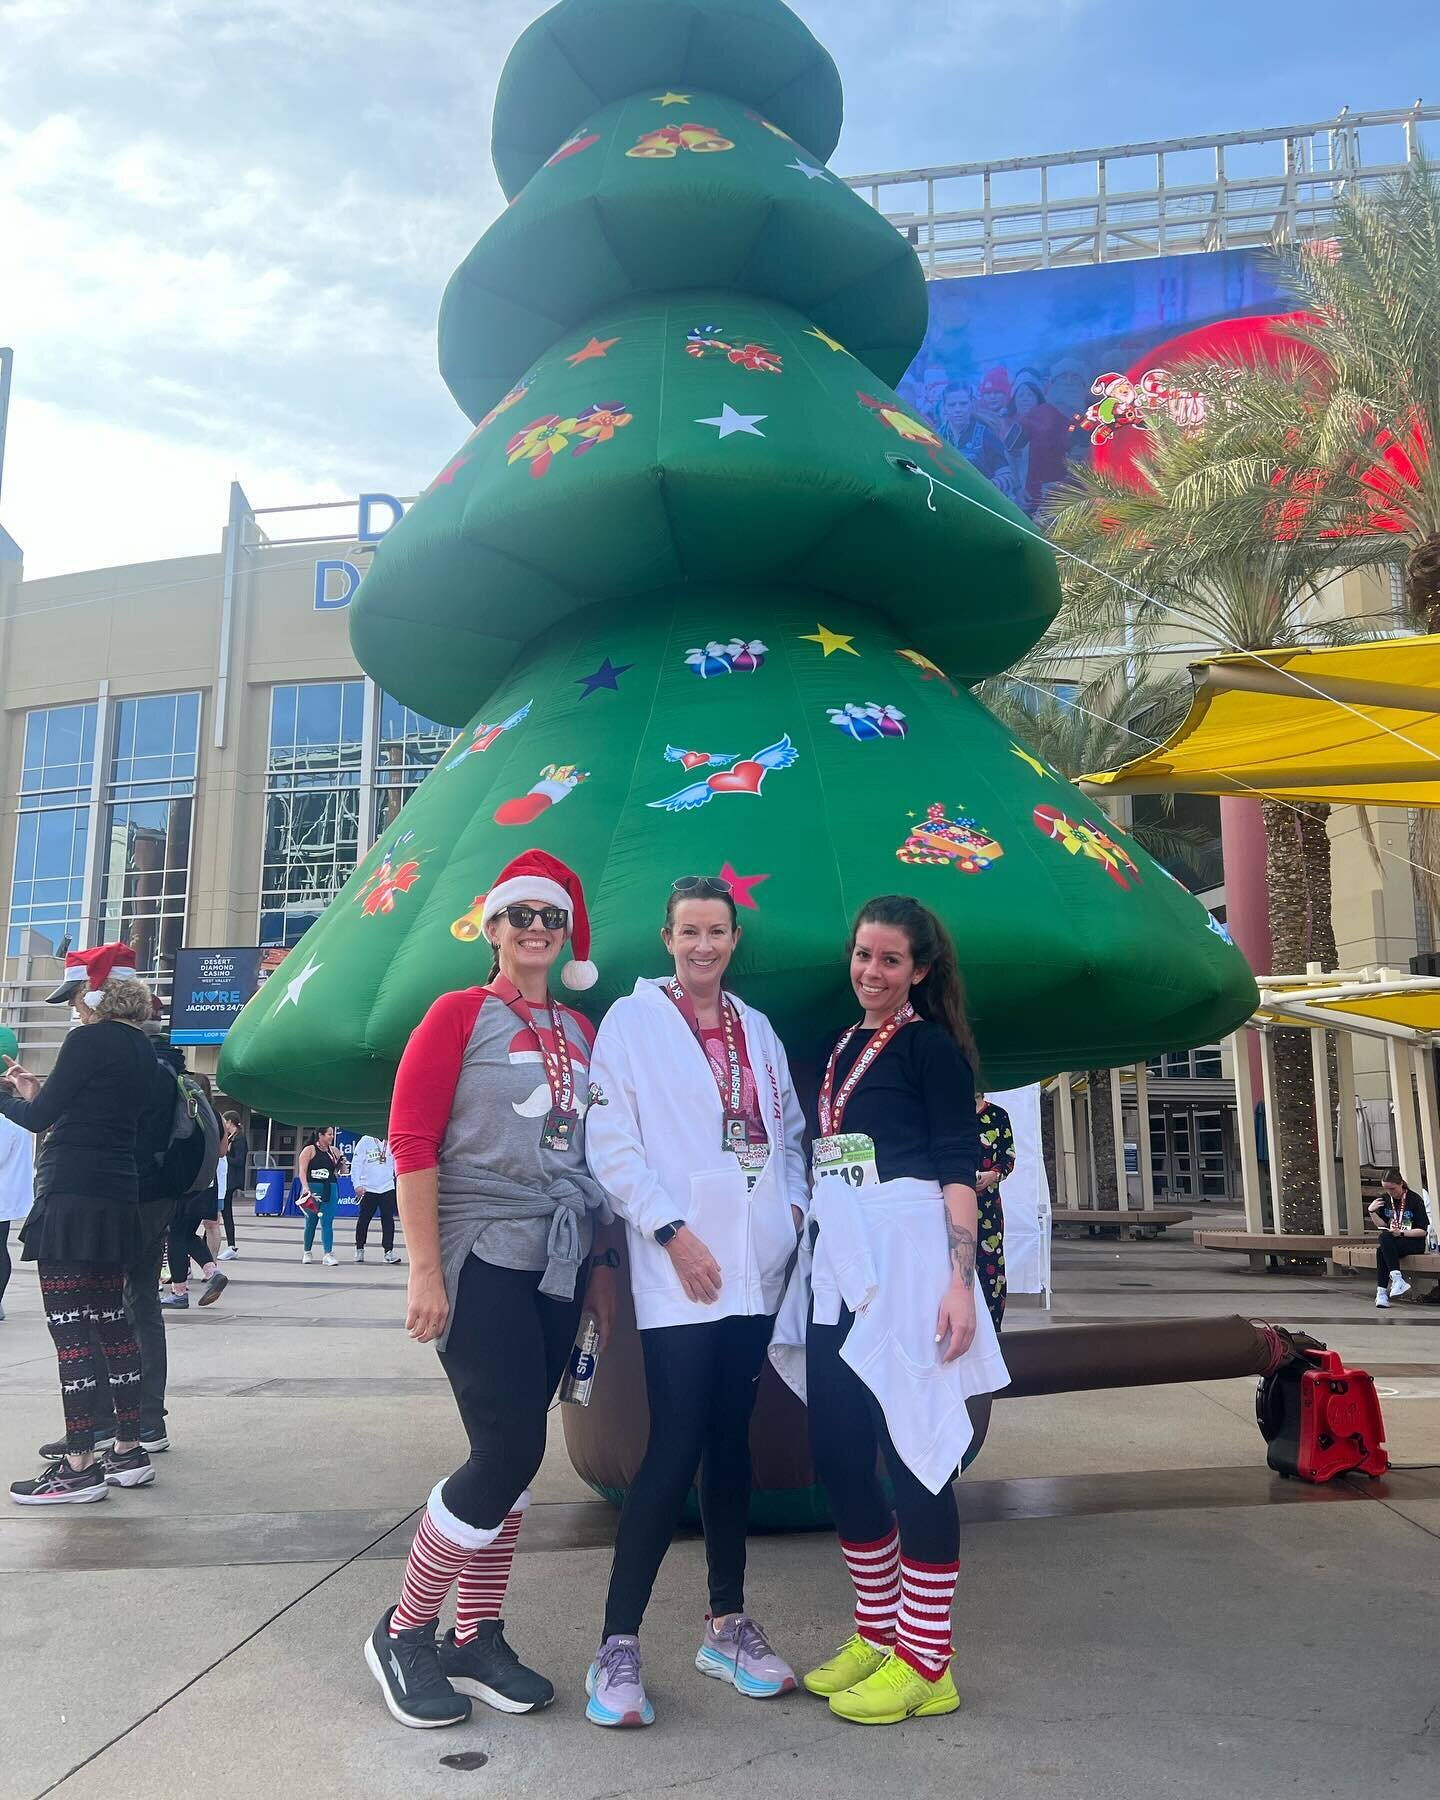 It was a great day for The Wellness Center&rsquo;s Yogis for the Cause at the Santa Hustle 5k.  #yogisforthecause #thewellnesscenteraz #santahustle